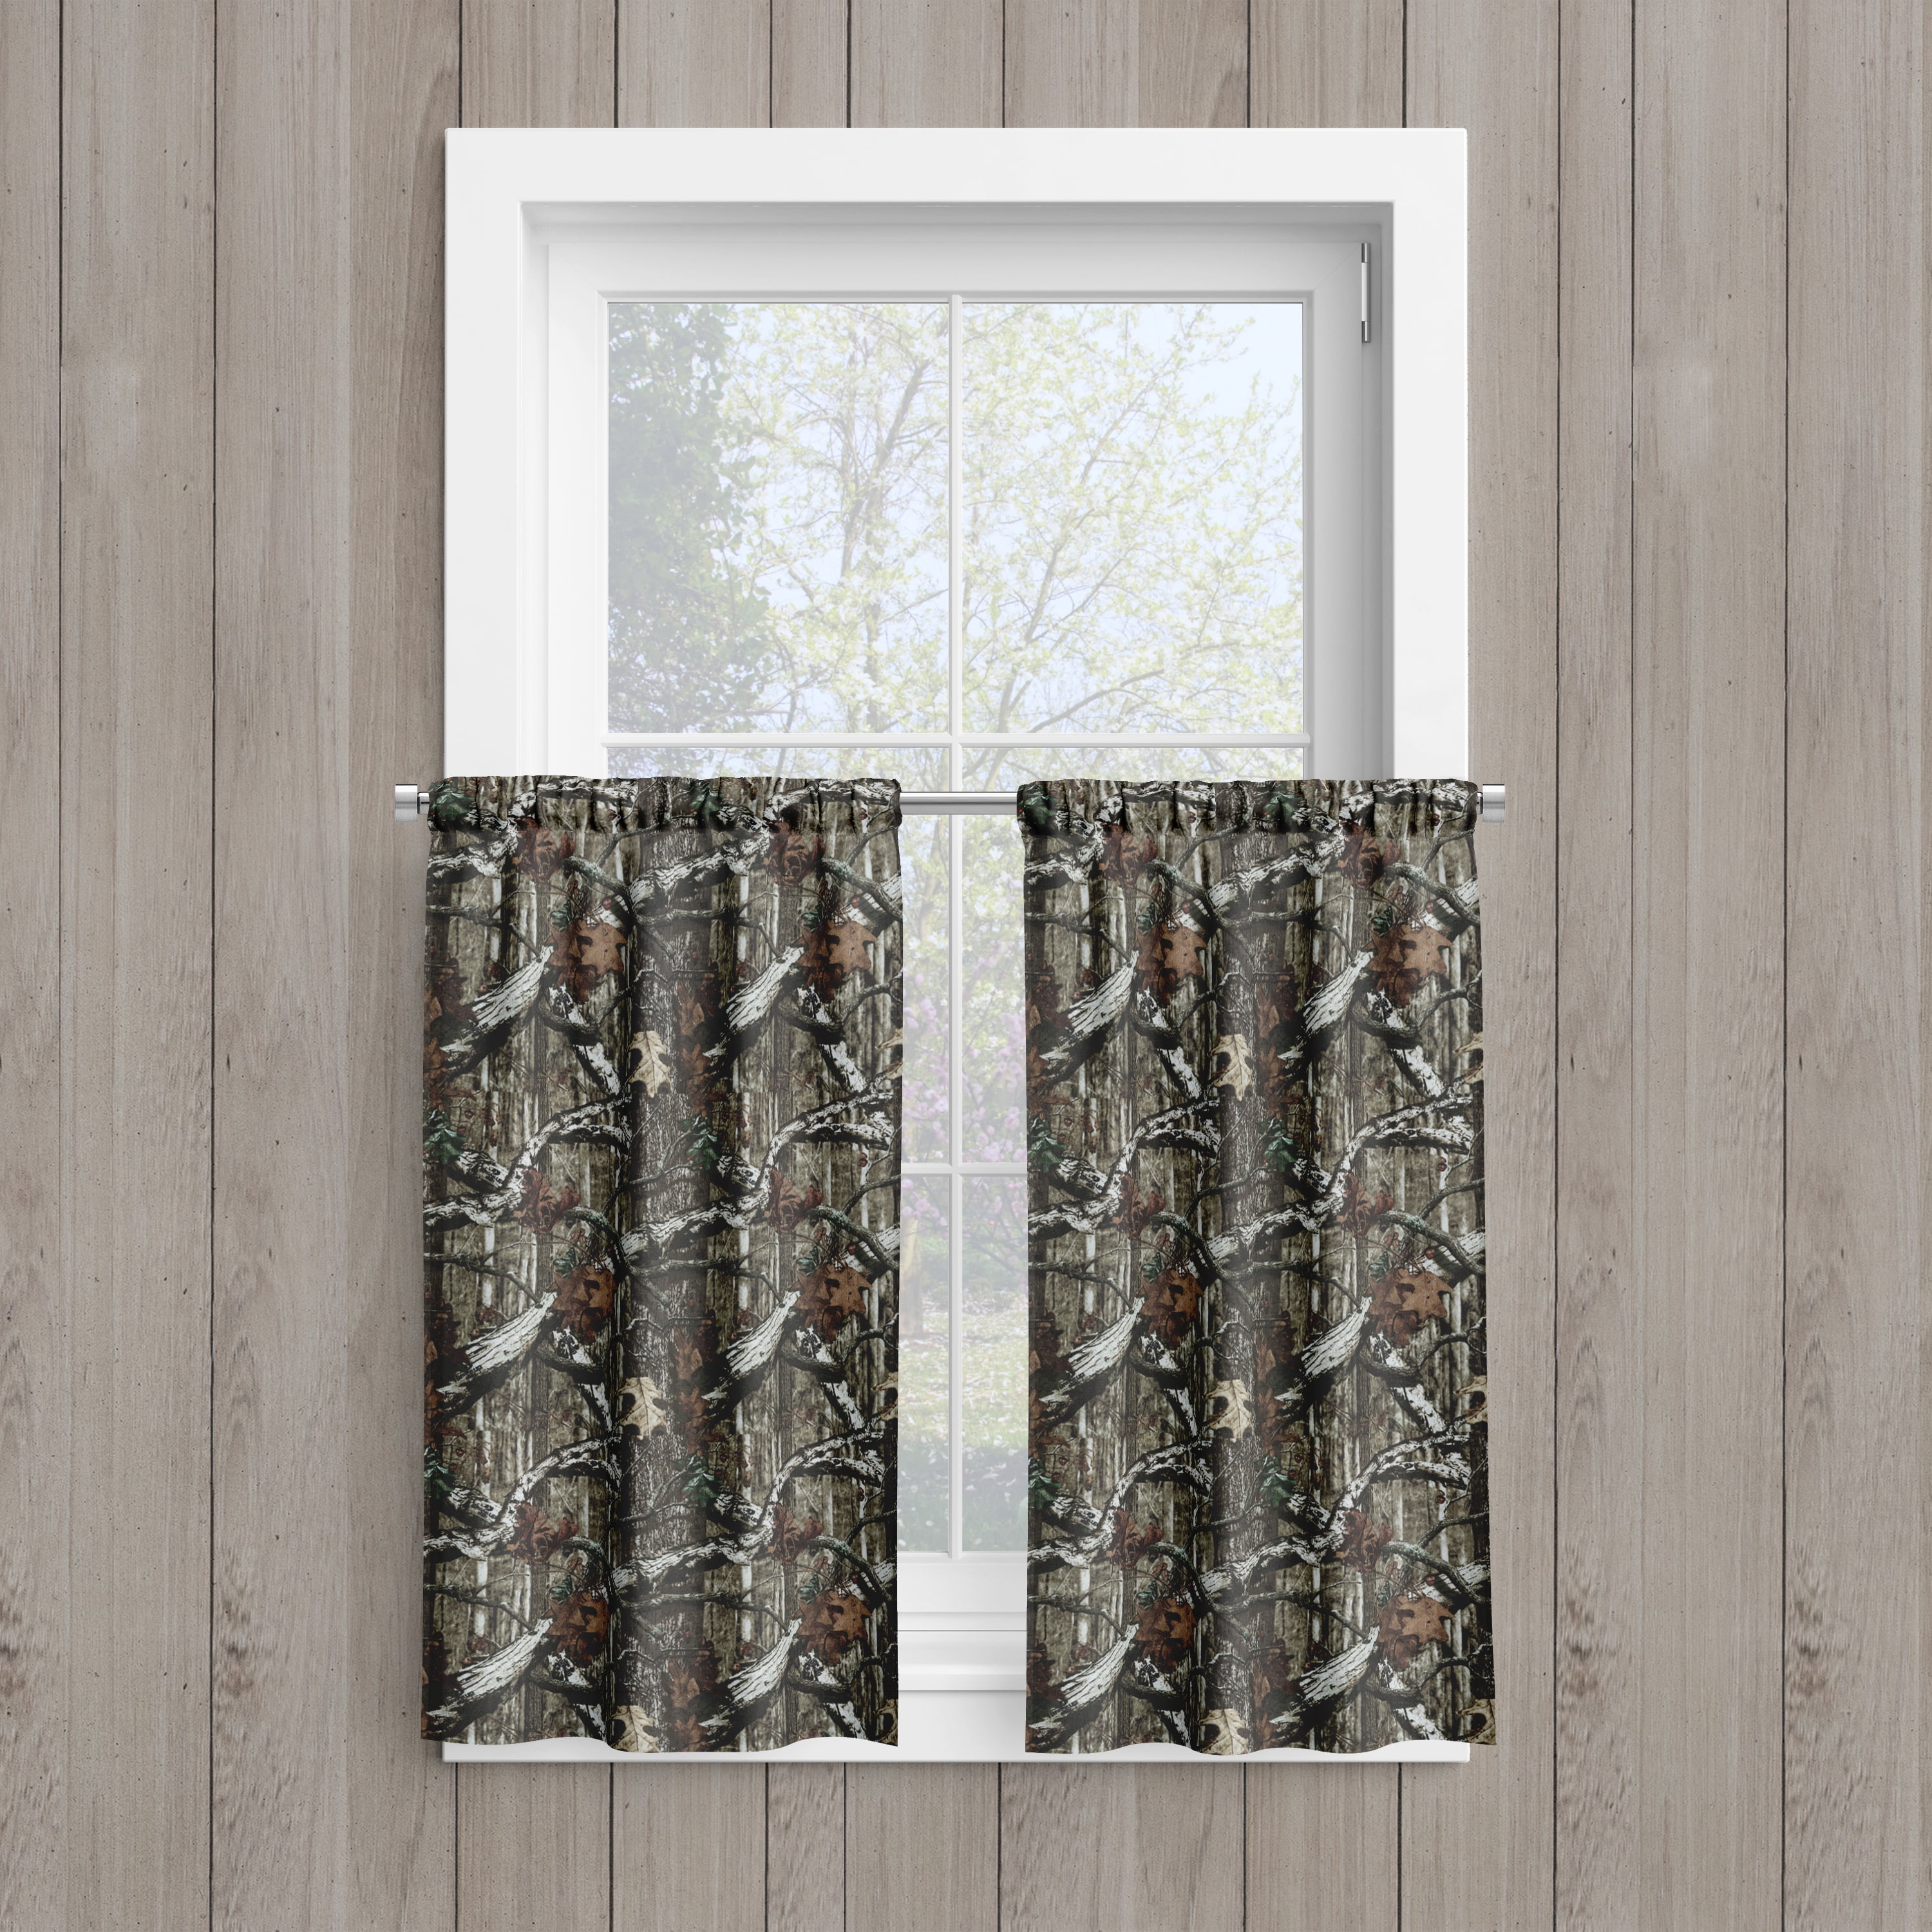 Mossy Oak Camouflage Curtain Tier Pair - 29 in. x 36 in. each, Set of ...